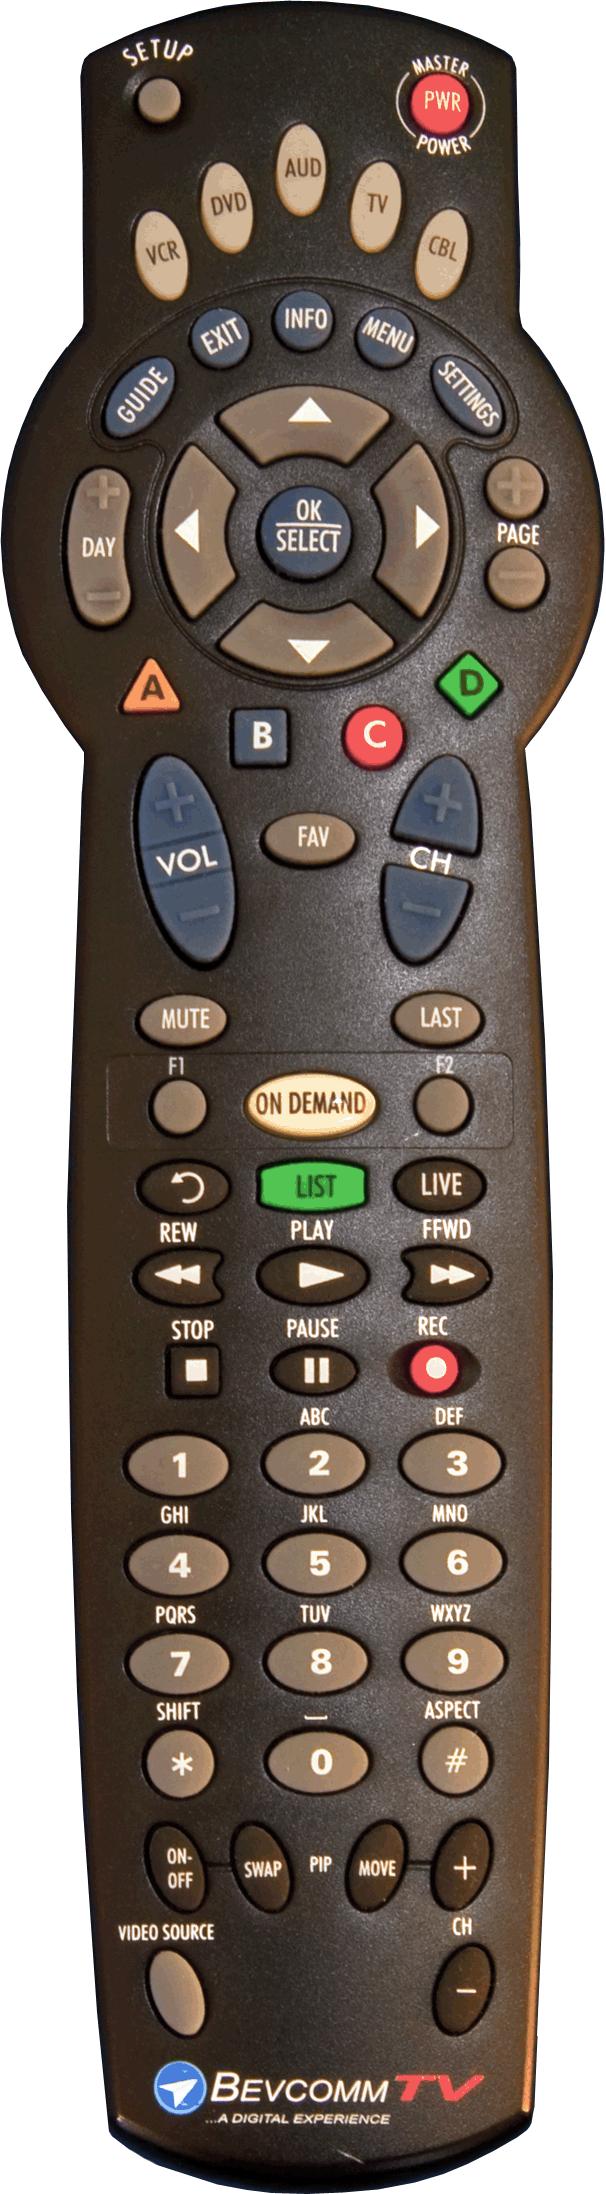 C Control Your Remote Setup Use for programming sequences of devices controlled by the remote. VCR, DVD, AUD, TV, CBL Use one remote to control multiple devices. EXIT Exit the current screen.